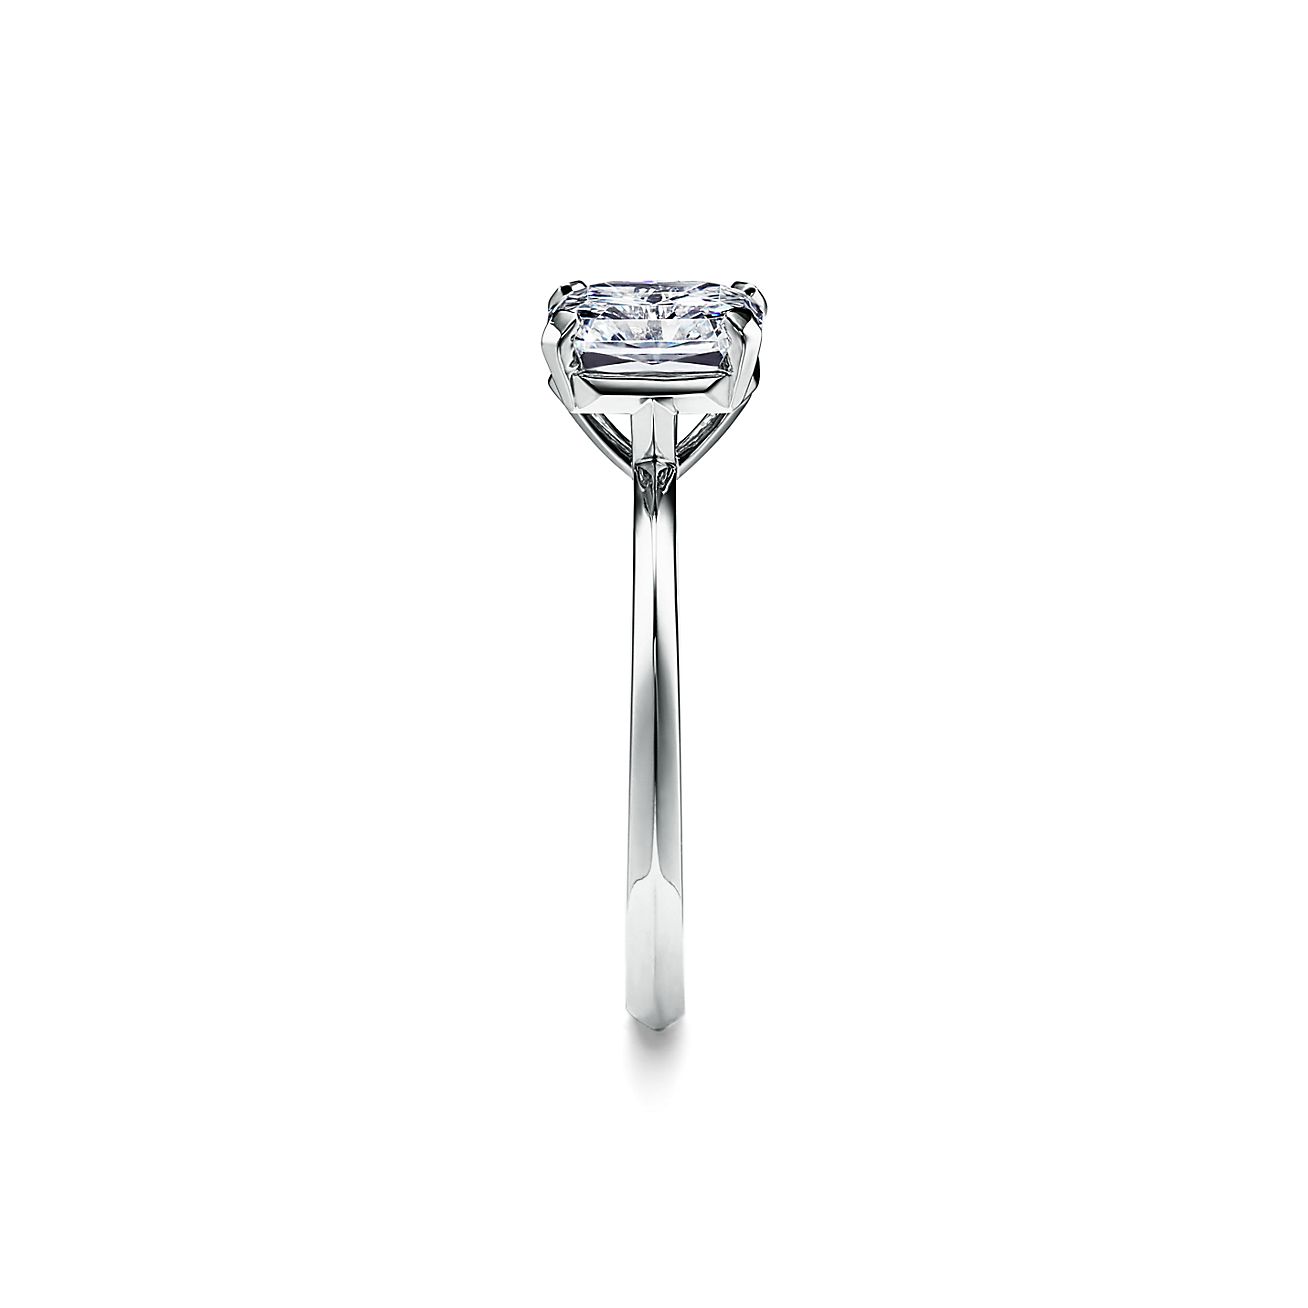 Tiffany True™ Engagement Ring with a 